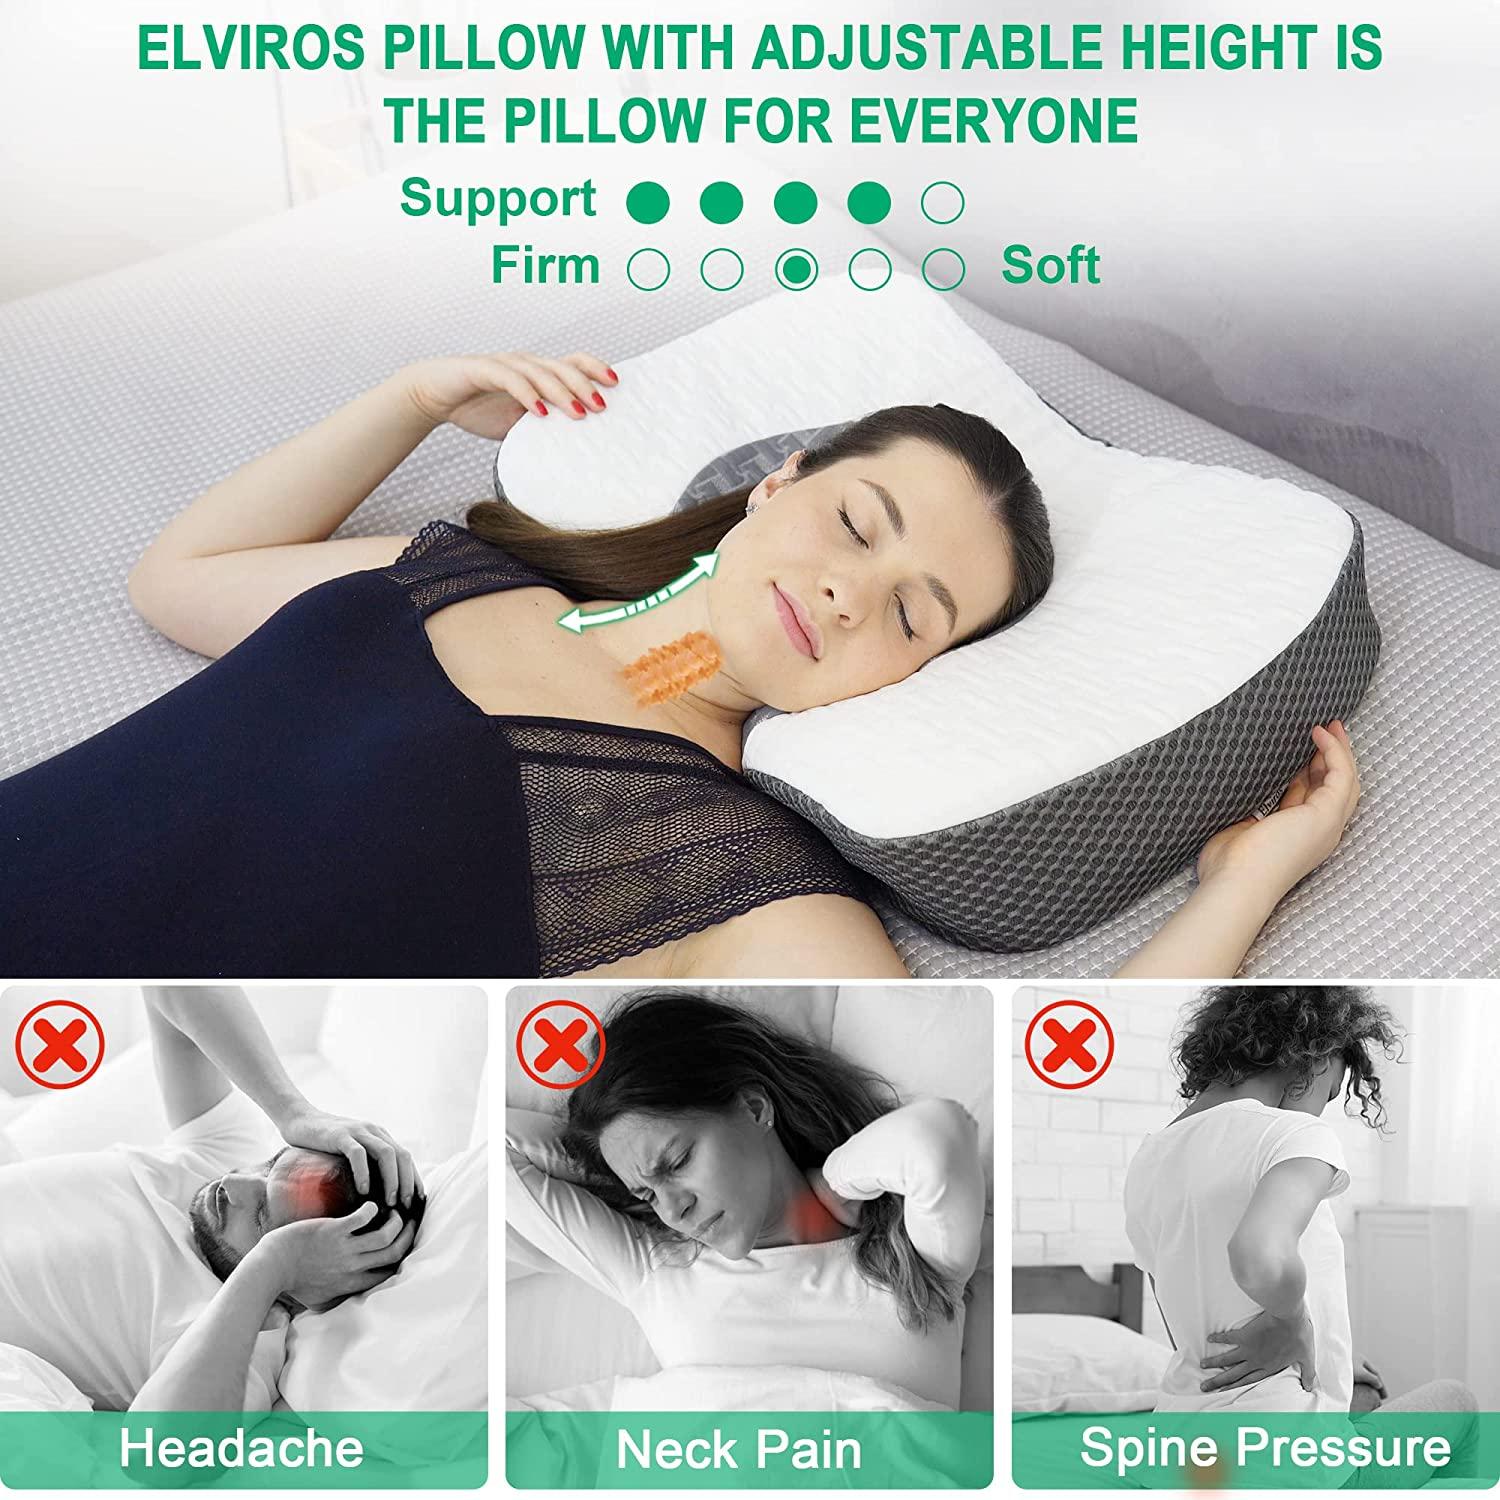 Elviros Cervical Memory Foam Neck Pillow for Side Sleeping, Contour  Orthopedic Pillows for Back and Stomach Sleepers, Adjustable Ergonomic Bed Pillow  Pain Relief, CertiPUR-US (Dark Grey) Dark Grey Queen Size 23.6*15.2*3.9/